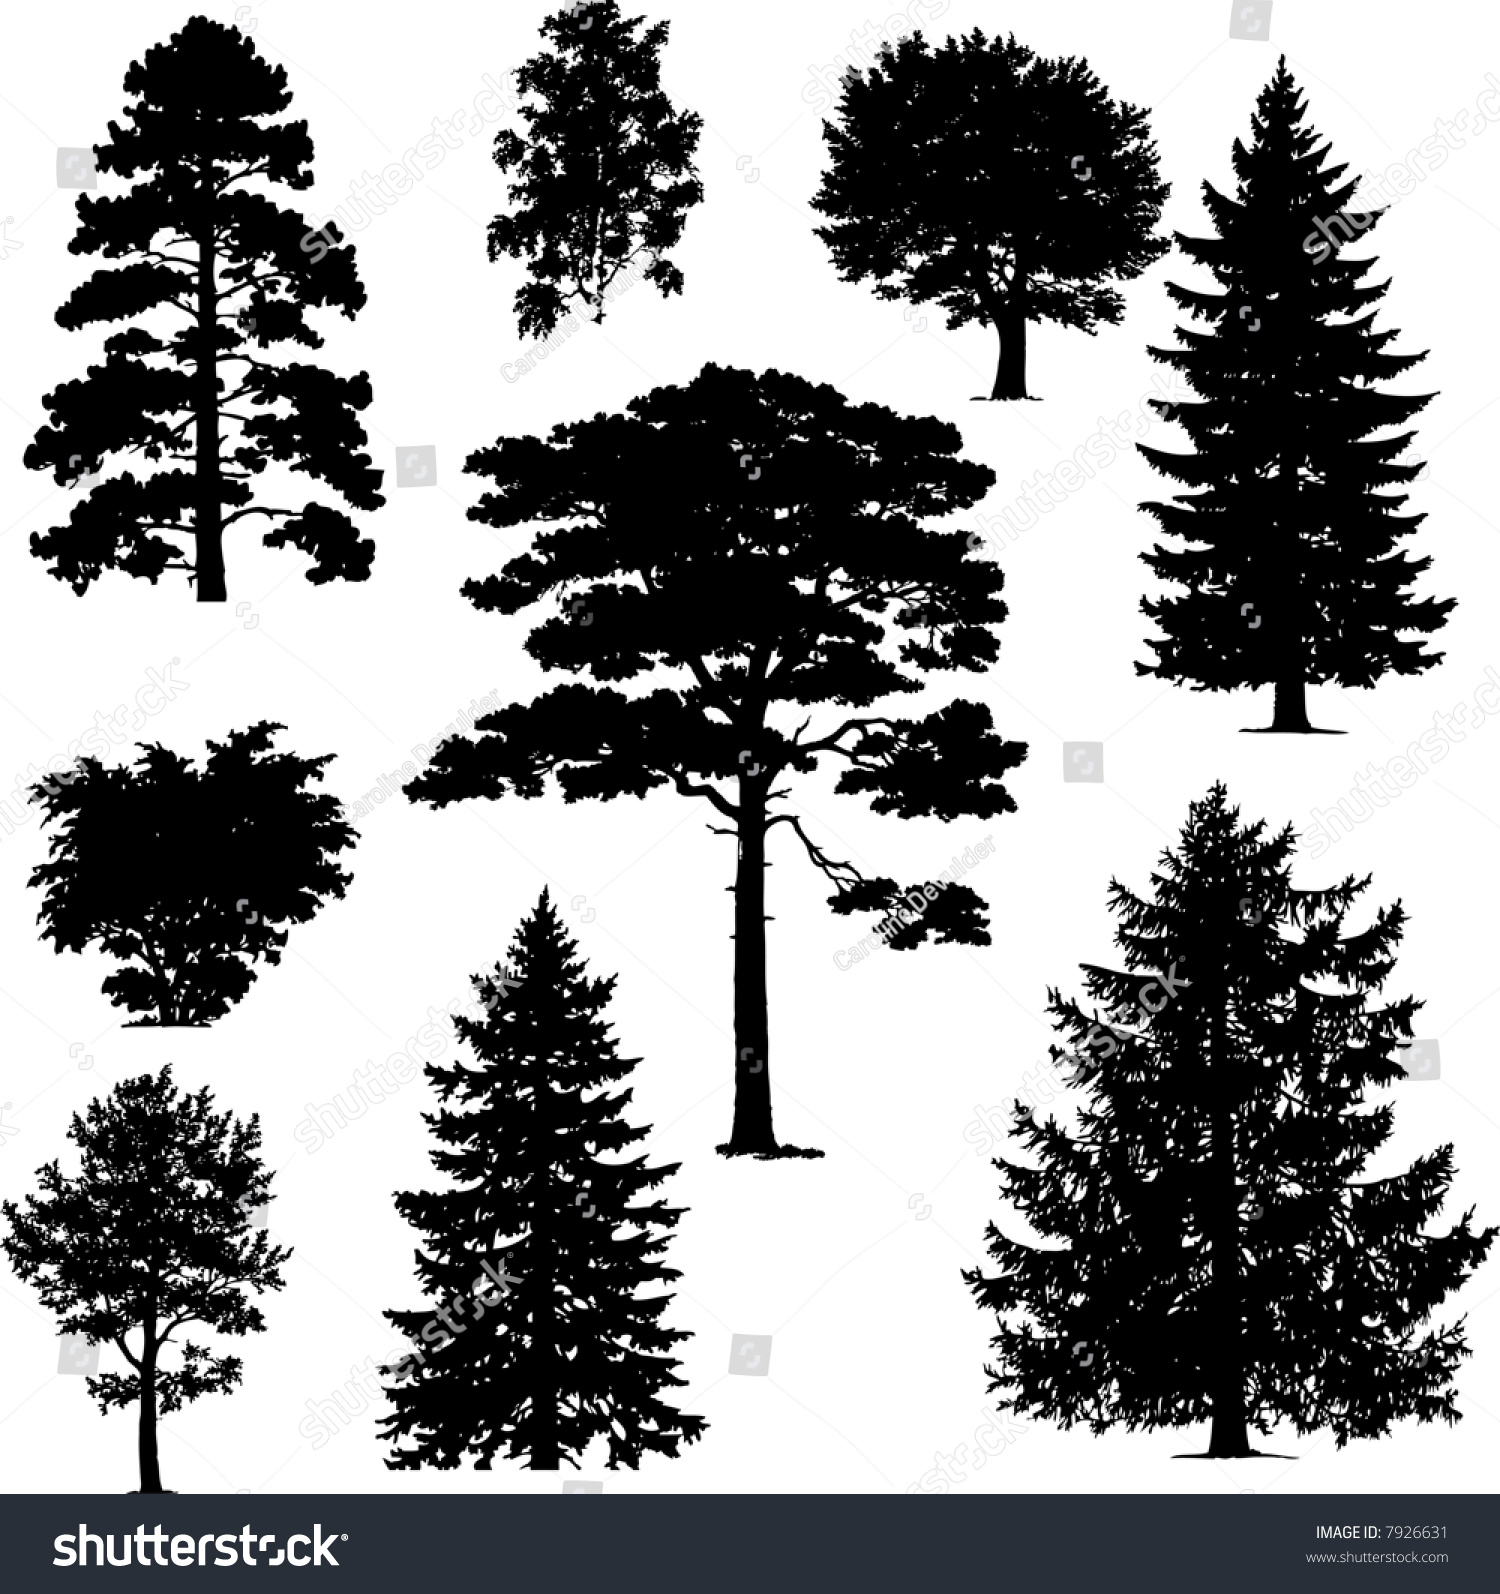 Collection Of Pine Trees Stock Vector Illustration 7926631 : Shutterstock